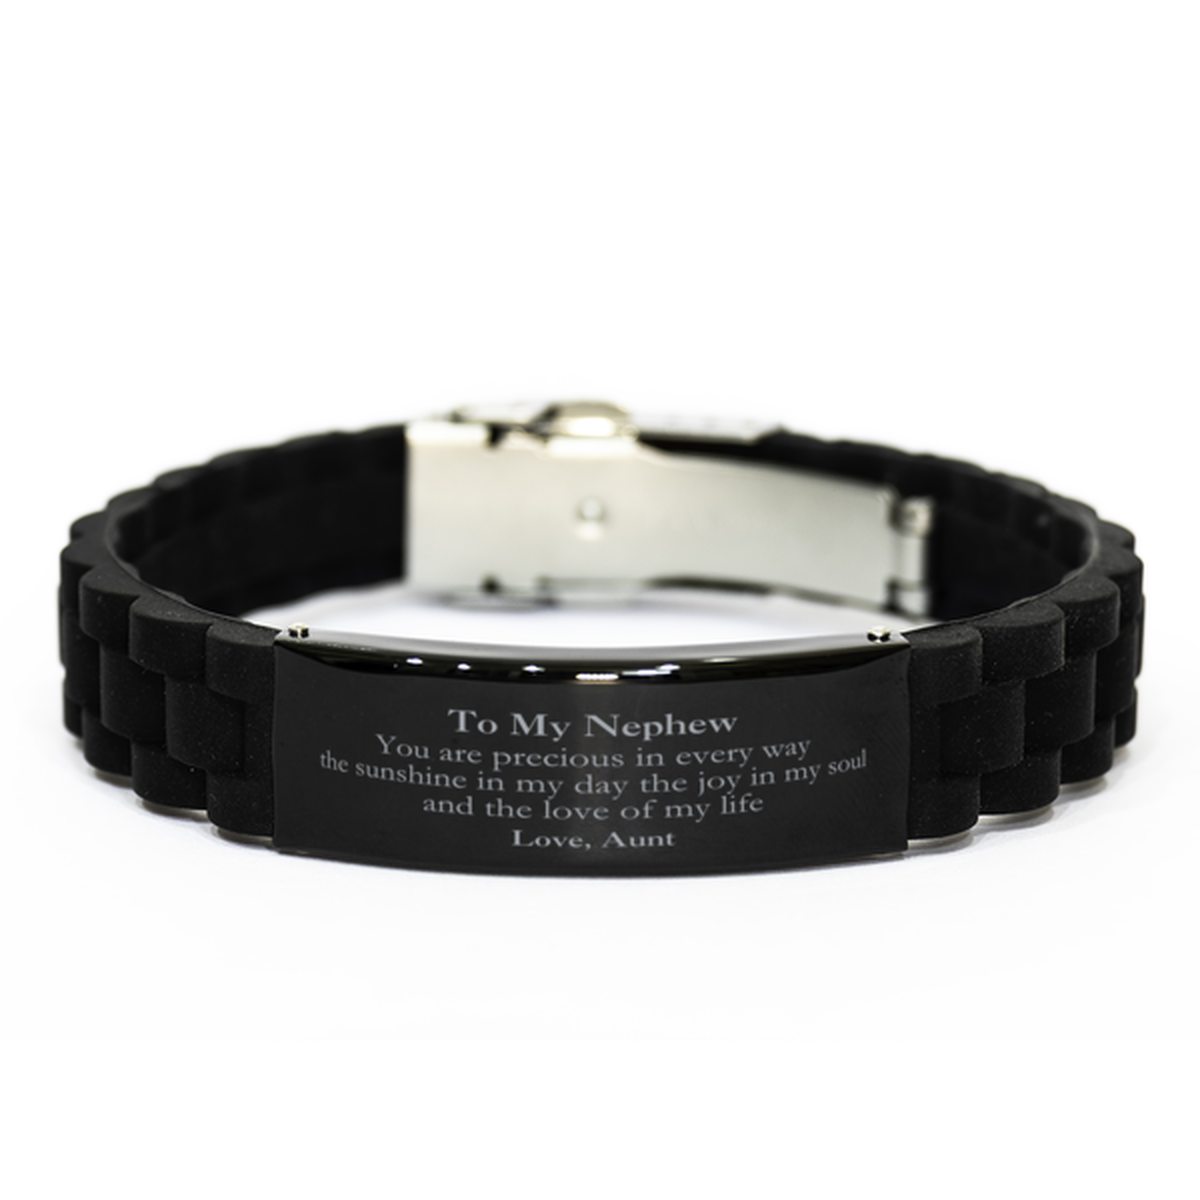 Graduation Gifts for Nephew Black Glidelock Clasp Bracelet Present from Aunt, Christmas Nephew Birthday Gifts Nephew You are precious in every way the sunshine in my day. Love, Aunt